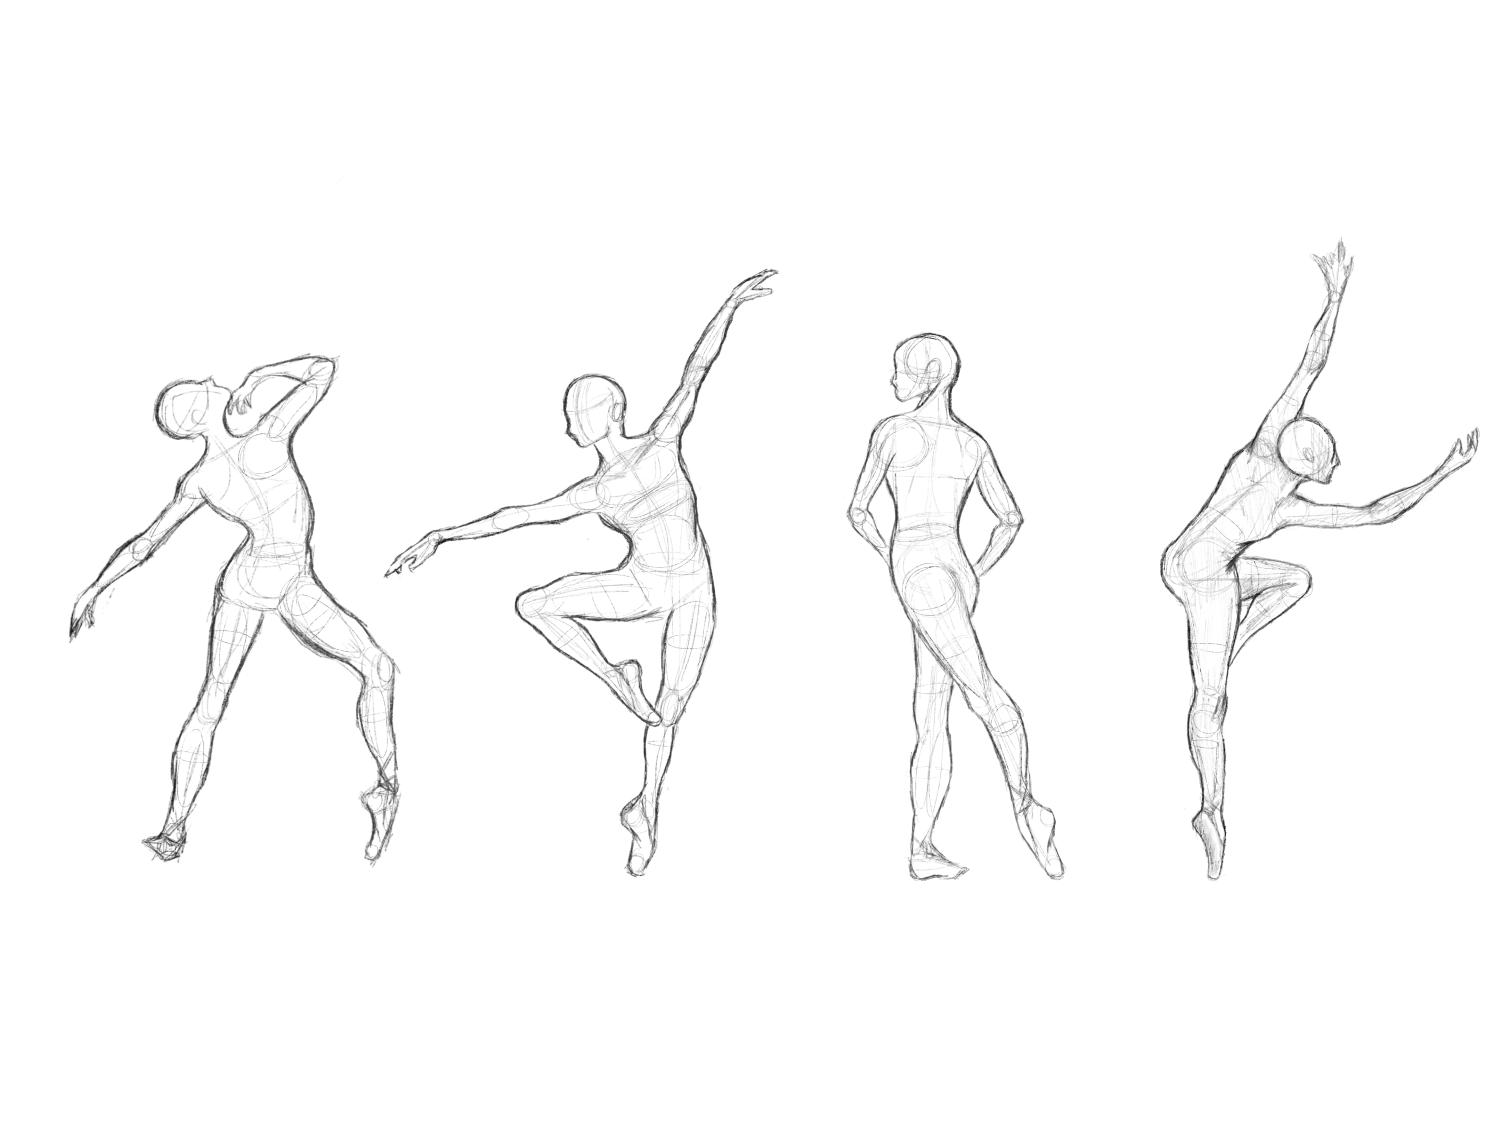 Ballerina Drawing Reference and Sketches for Artists